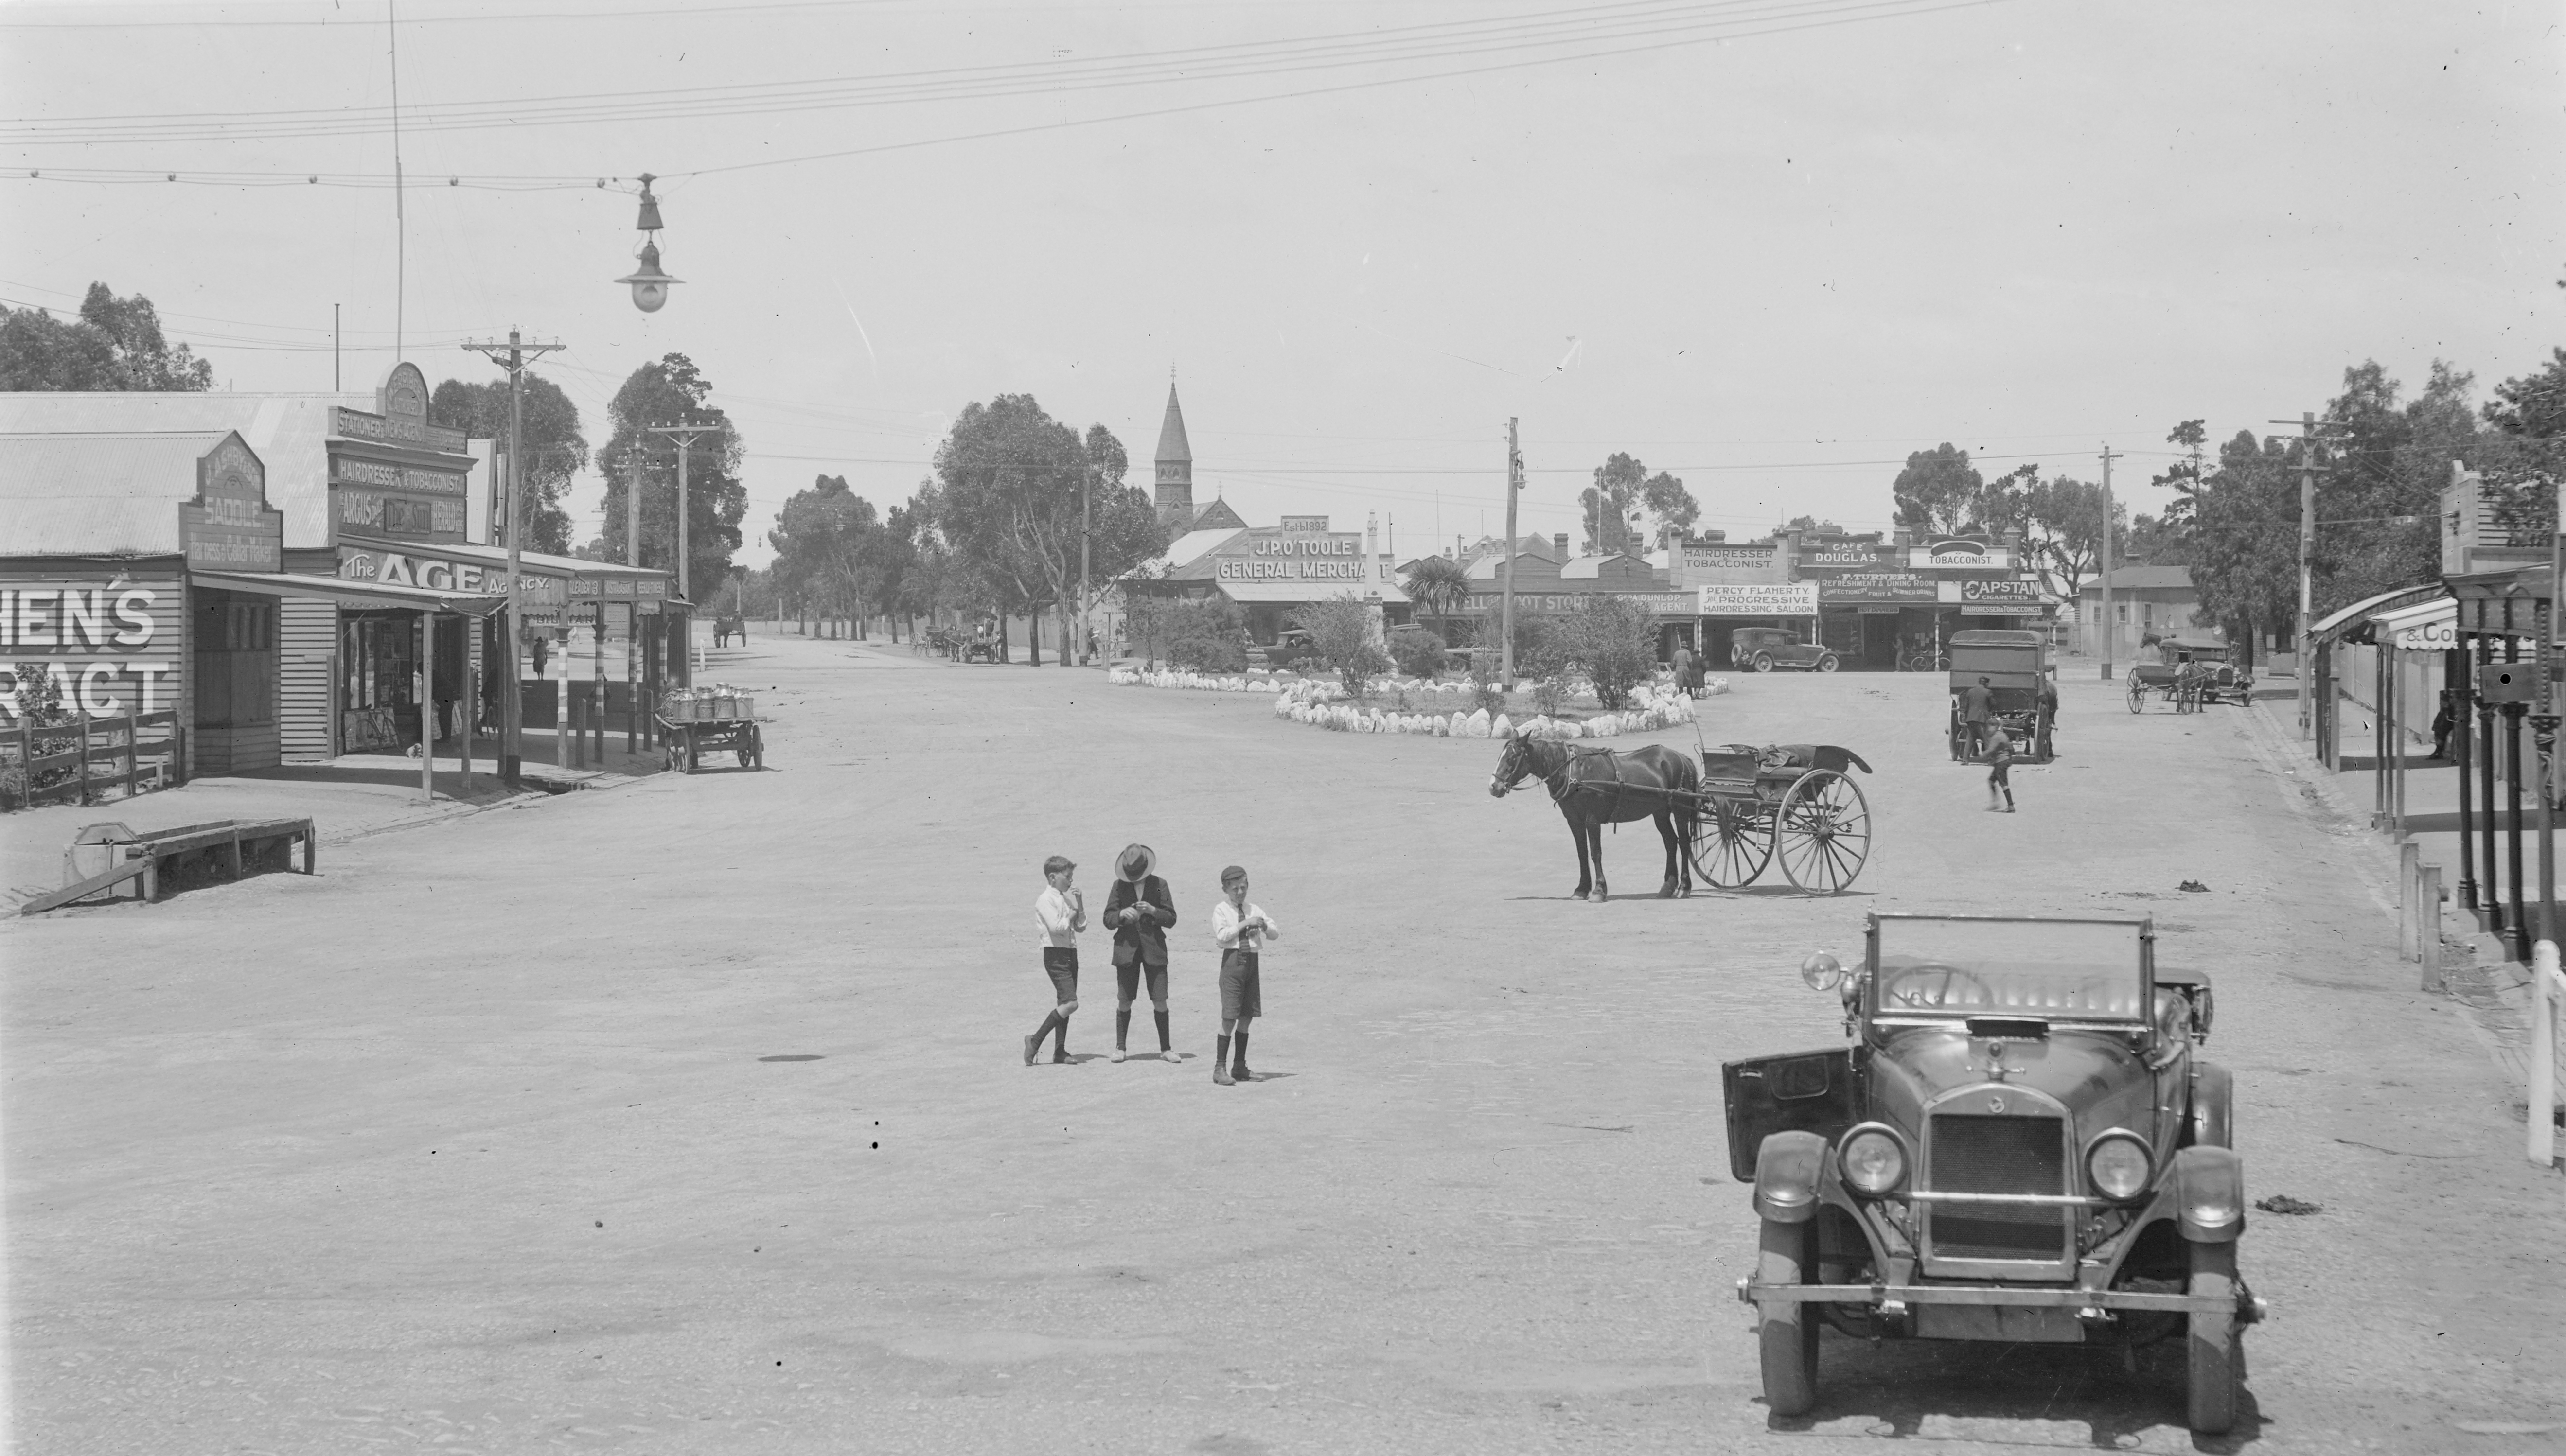 Station Street, Werribee, 1920s. Rose Stereograph Co. State Library Victoria, H32492/7311.